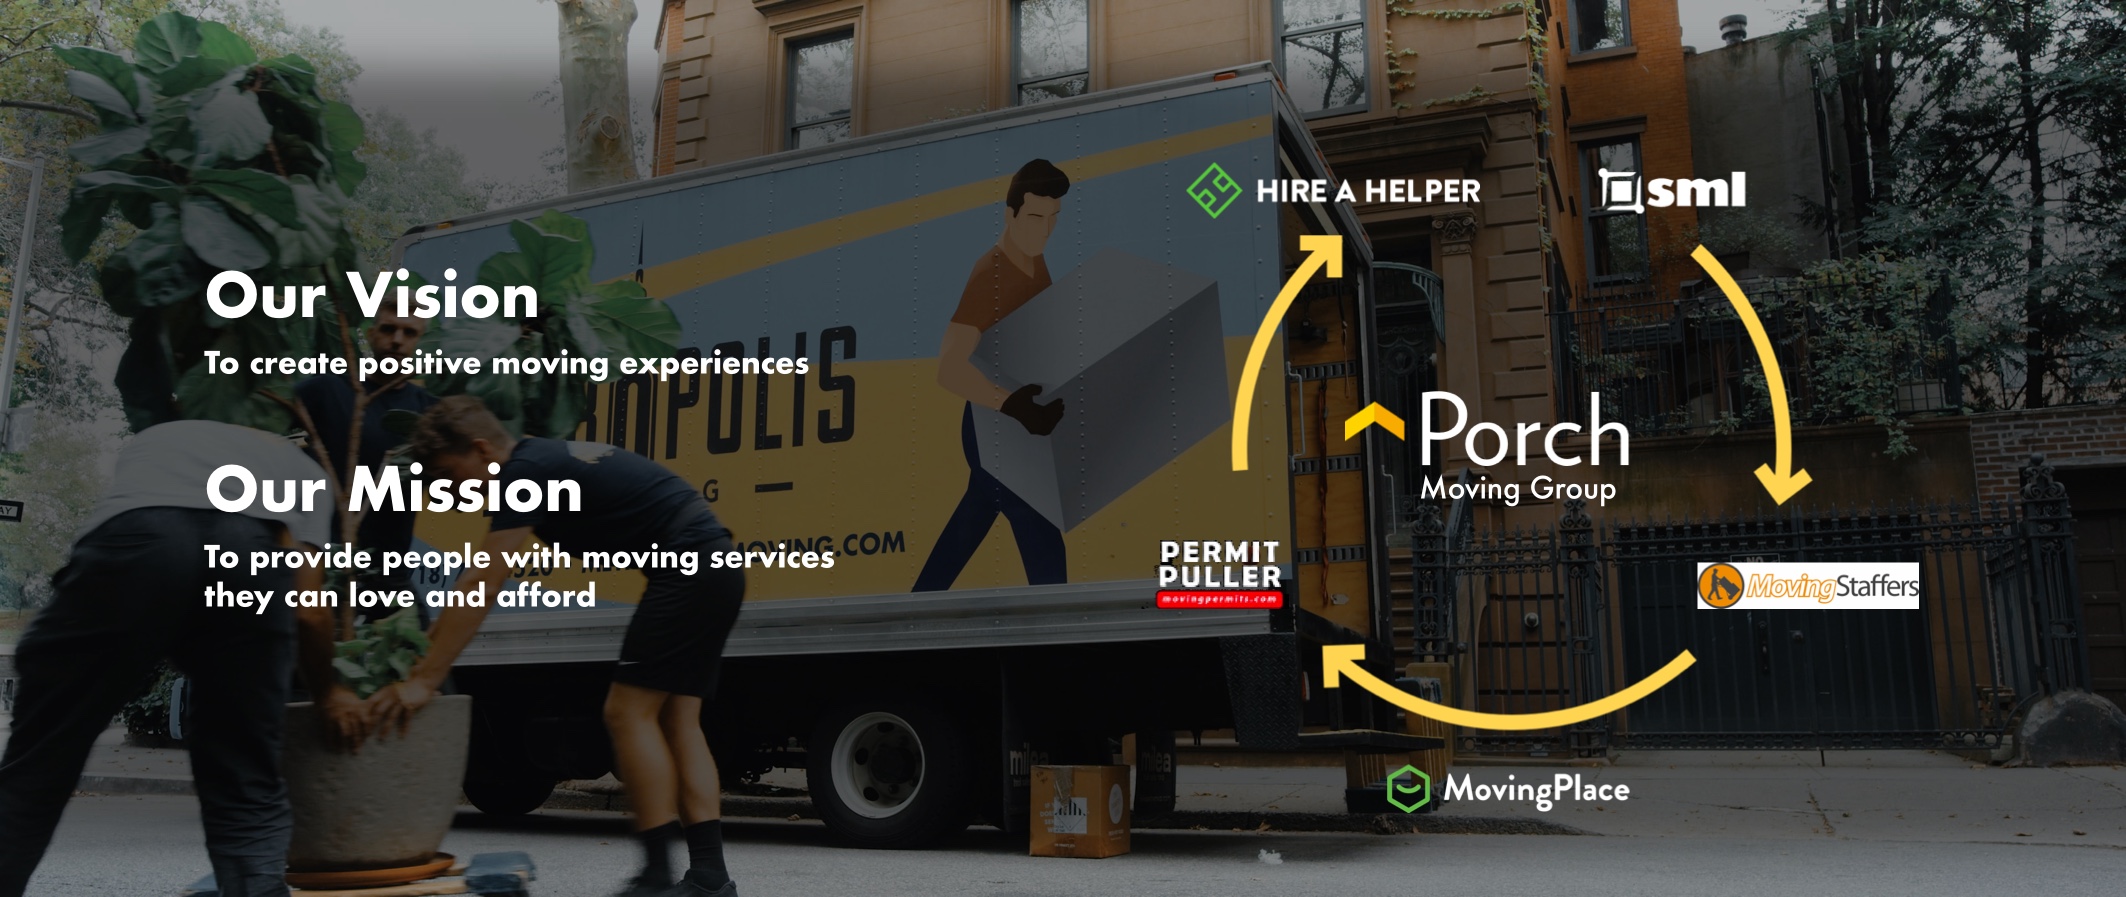 Complex graphic depicting the relationship between Porch Moving Group, HireAHelper, etc.